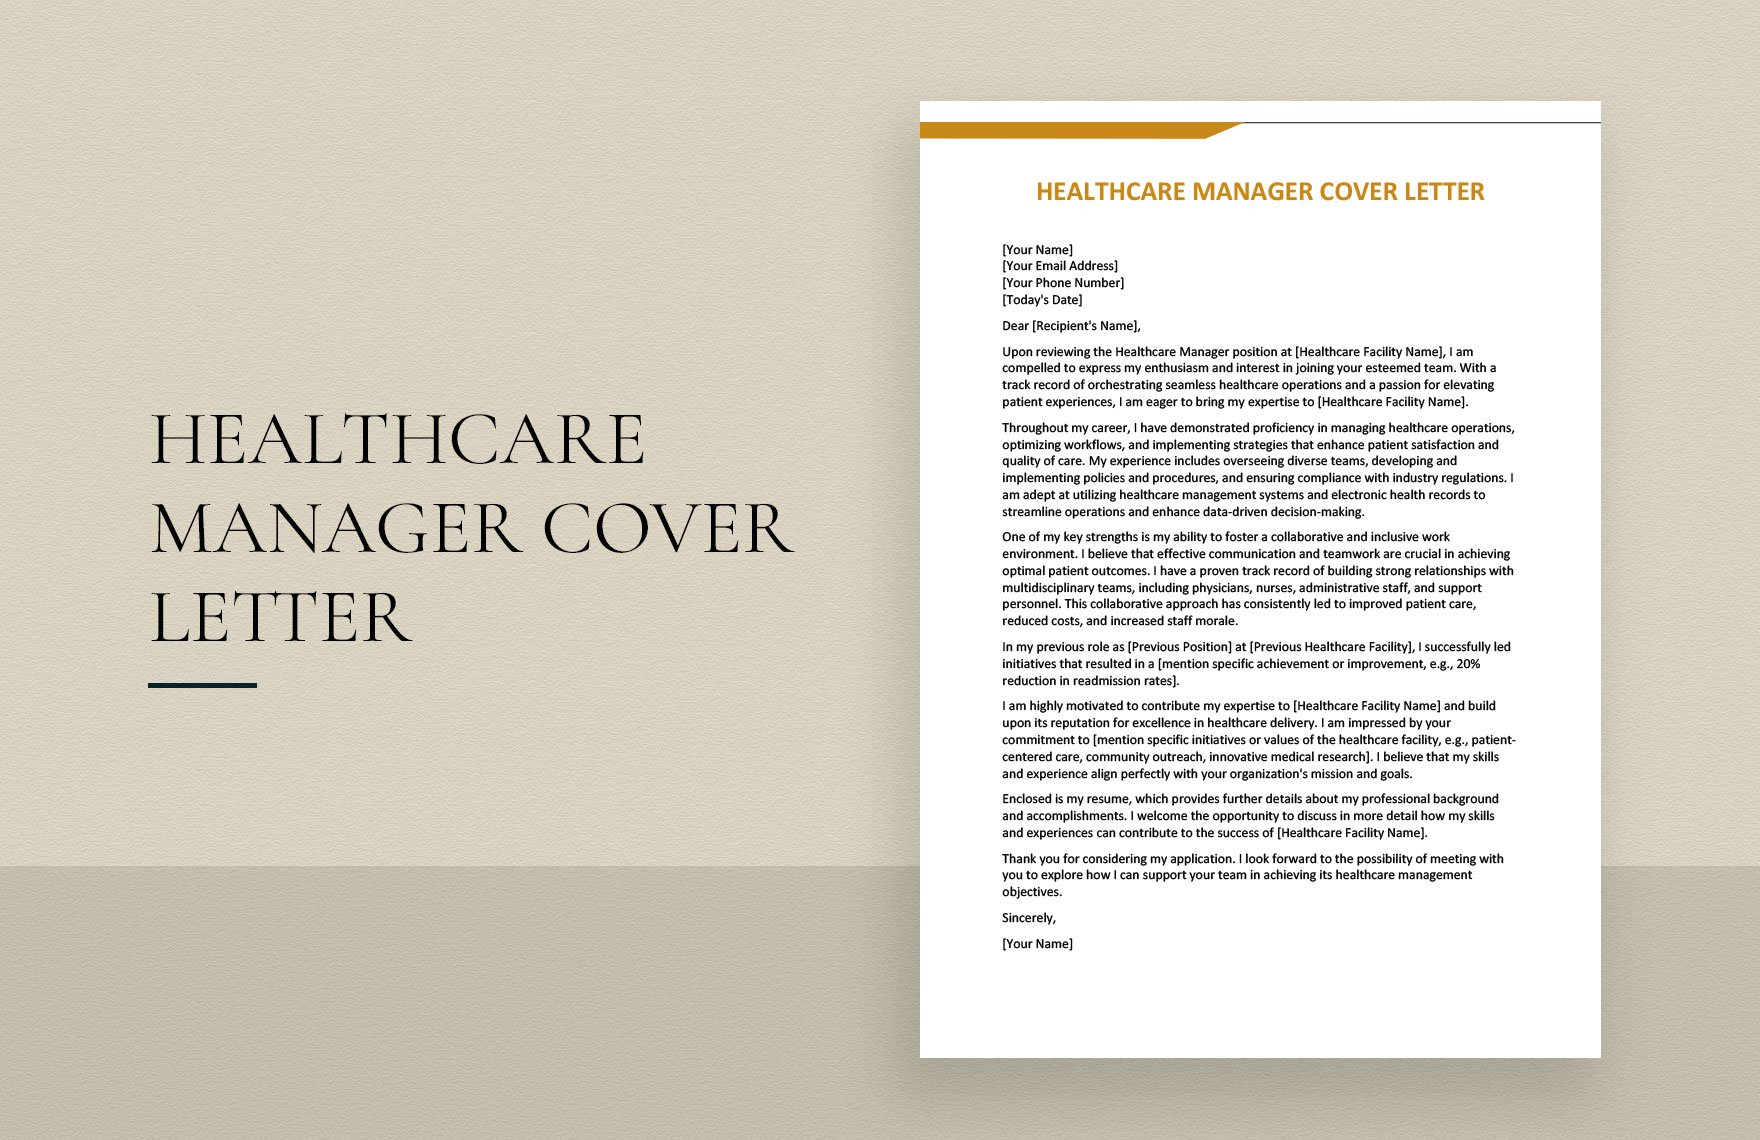 Healthcare Manager Cover Letter in Word, Google Docs